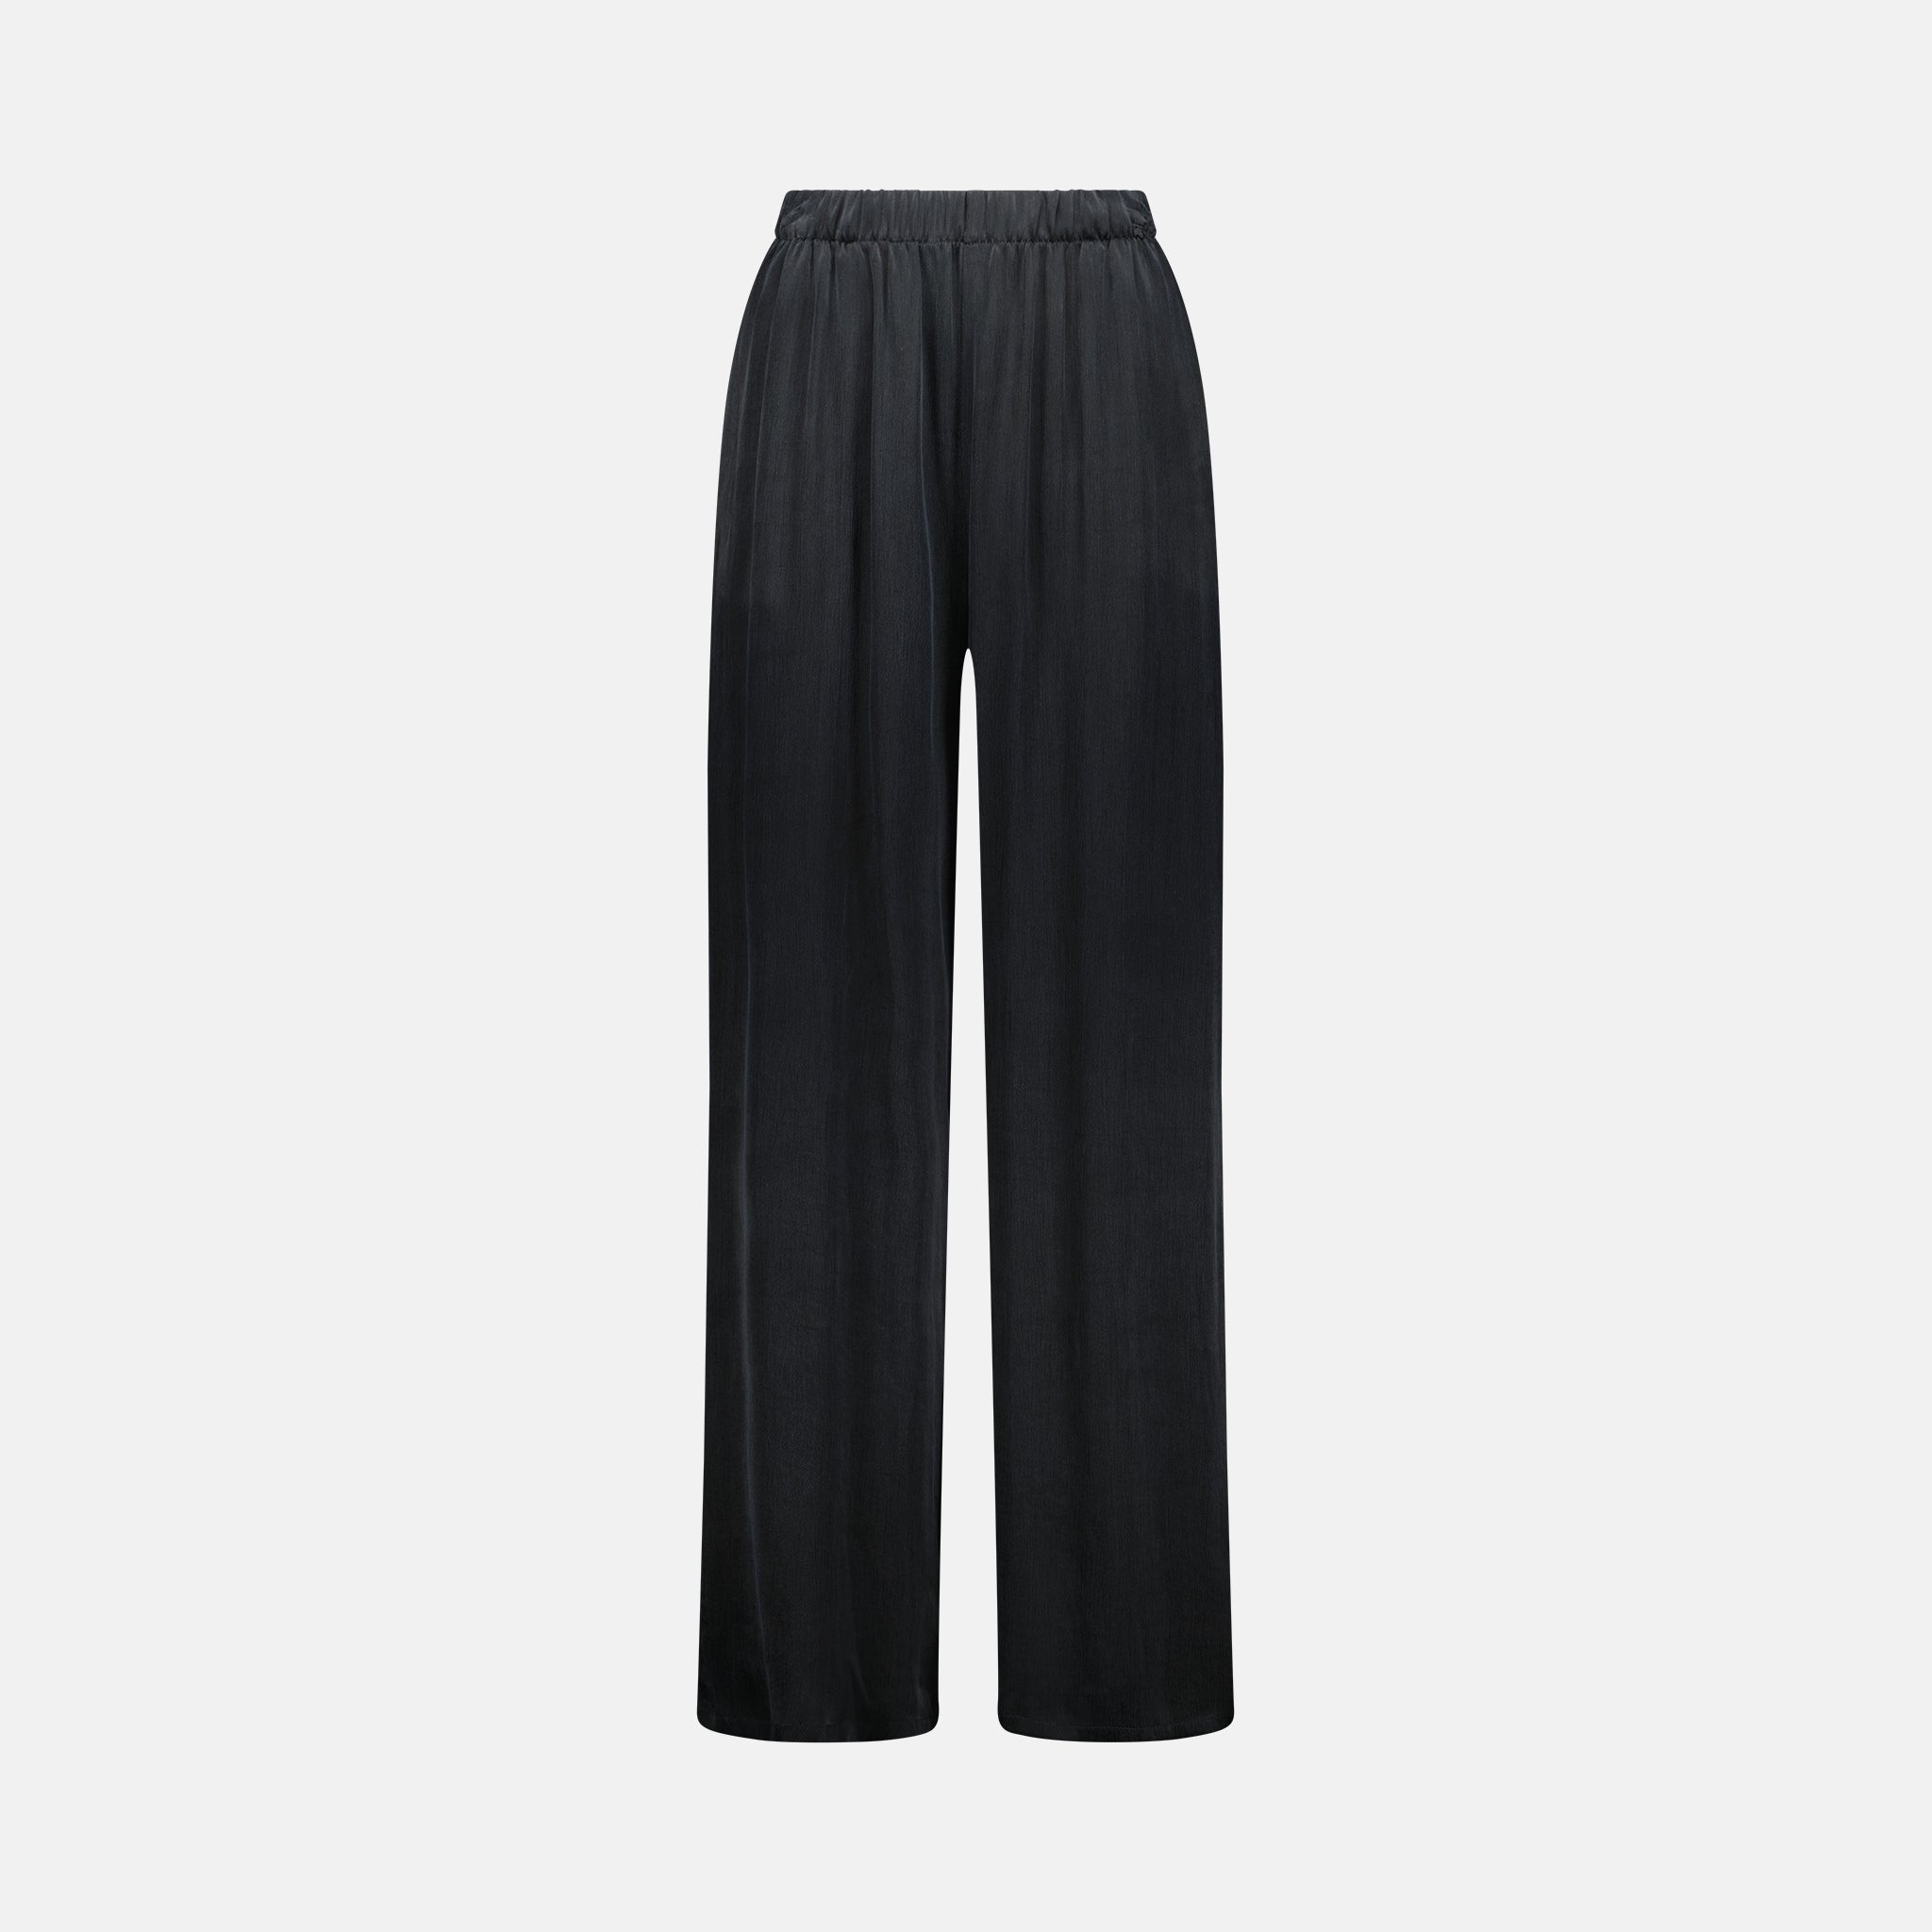 Essential Lounge Pant